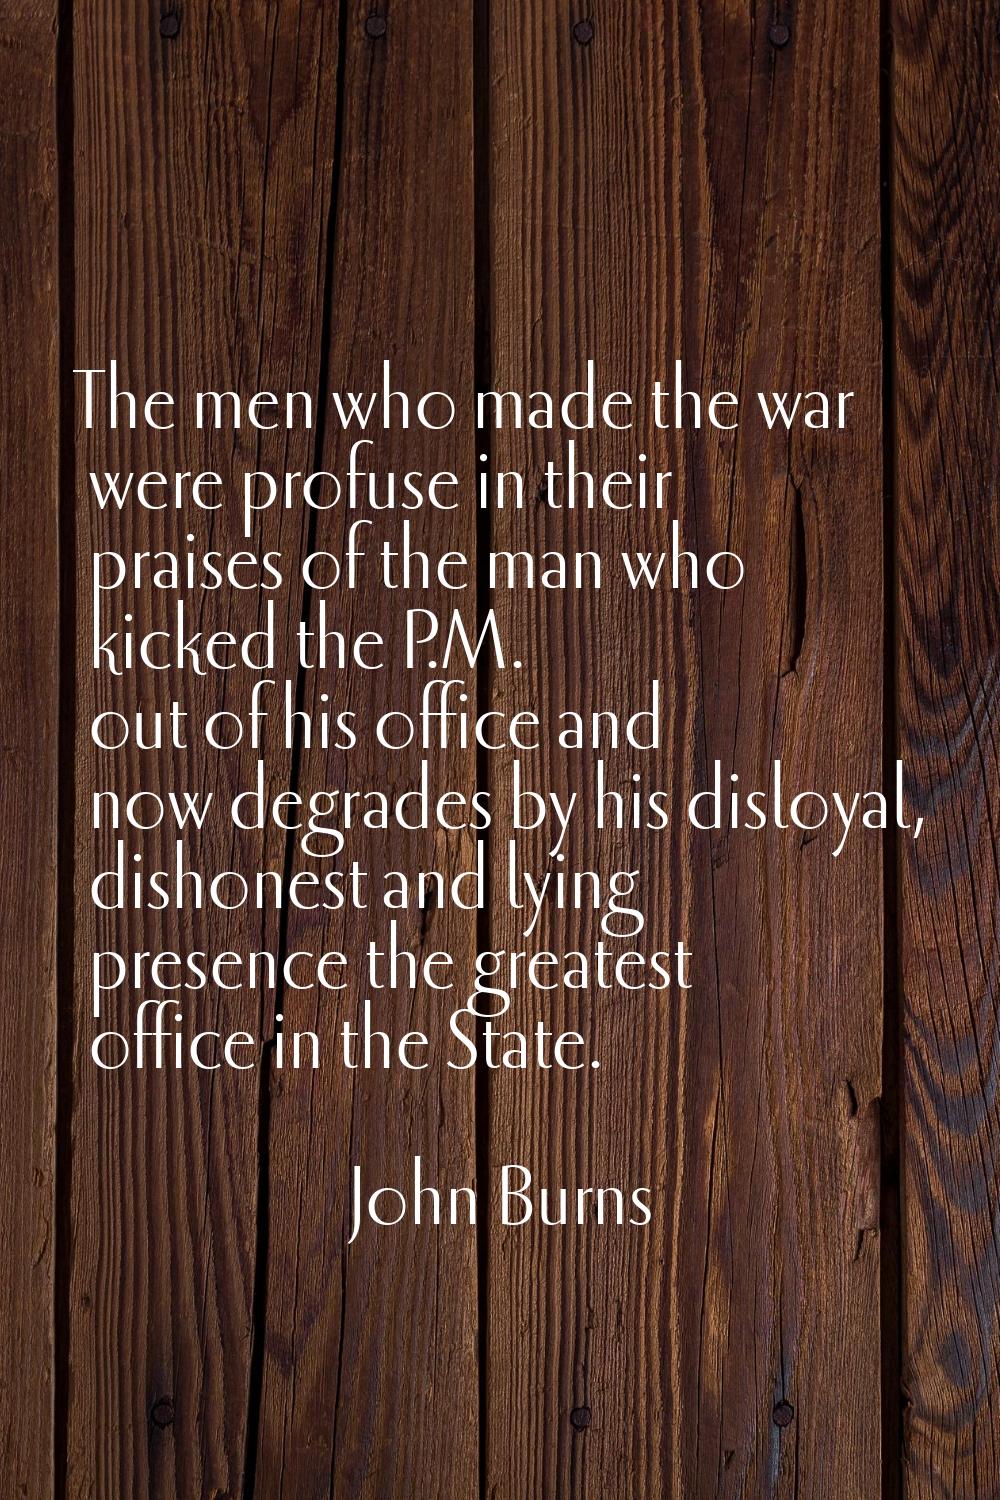 The men who made the war were profuse in their praises of the man who kicked the P.M. out of his of